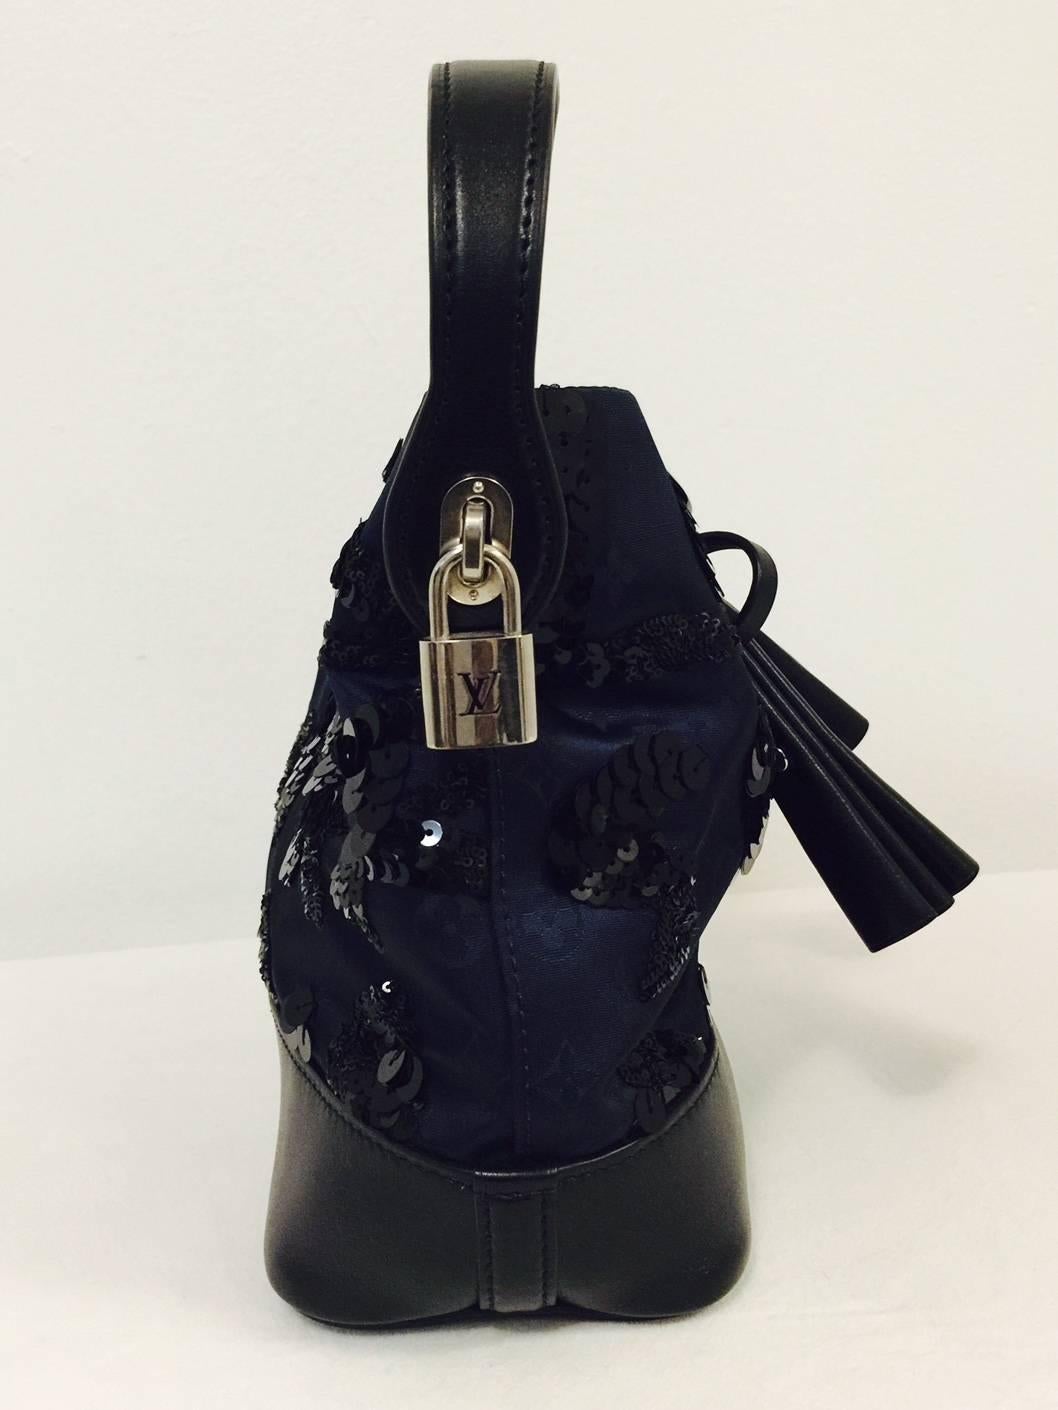 The limited edition NN14 was created through what Marc Jacobs described as a “cleaning” of the original design. Smaller, more streamlined, but still recognizable as a “bucket” for champagne or otherwise, the NN14 became the signature bag of